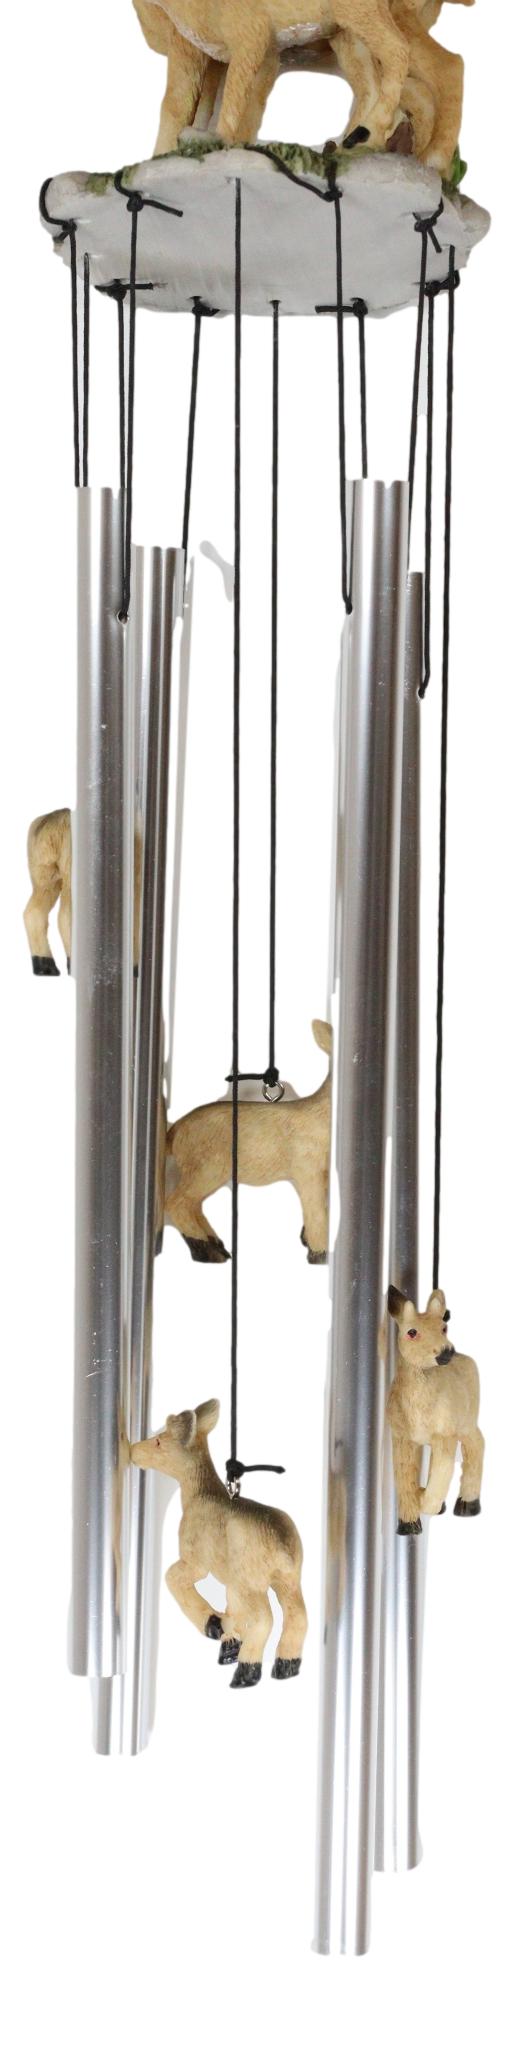 Ebros Deer Wind Chime Doe With Fawn Deer Family Decorative Wind Chime Patio